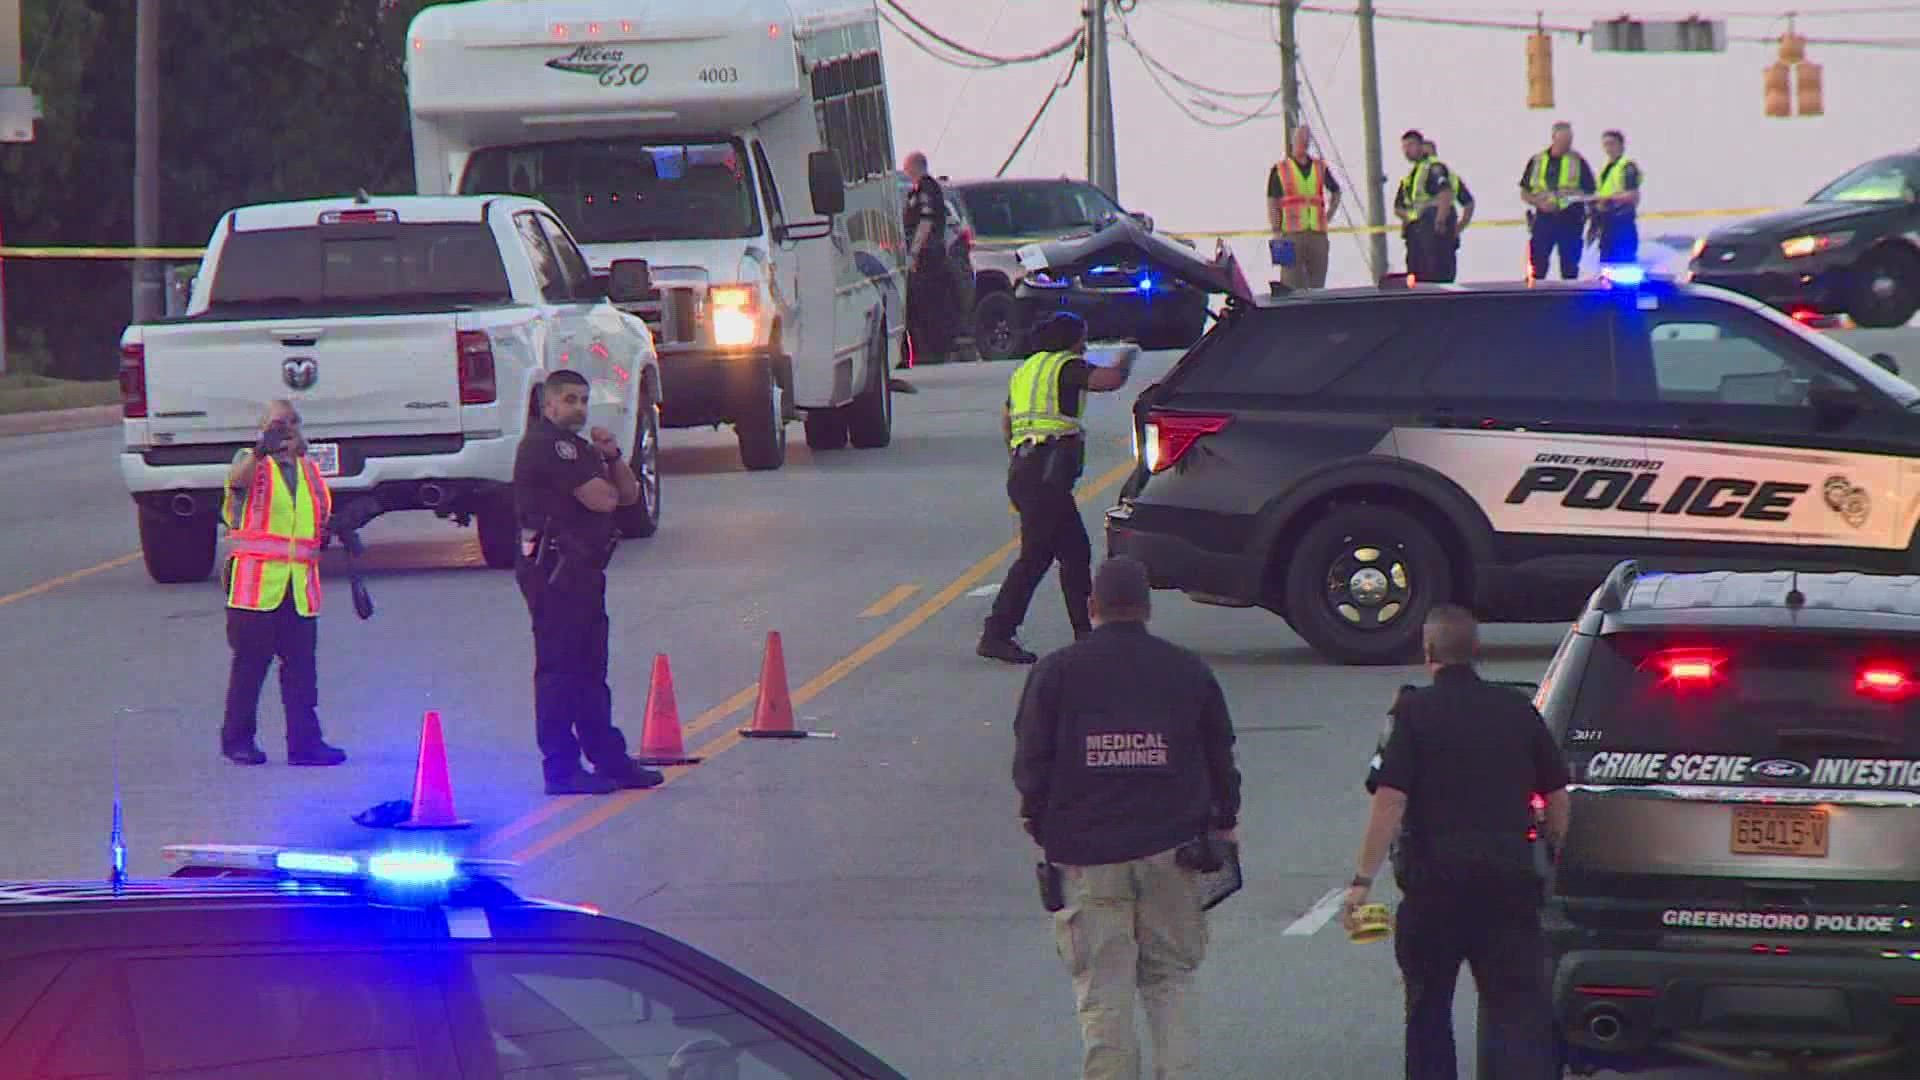 Greensboro police say 71-year-old John Rankin died after getting hit by two trucks.